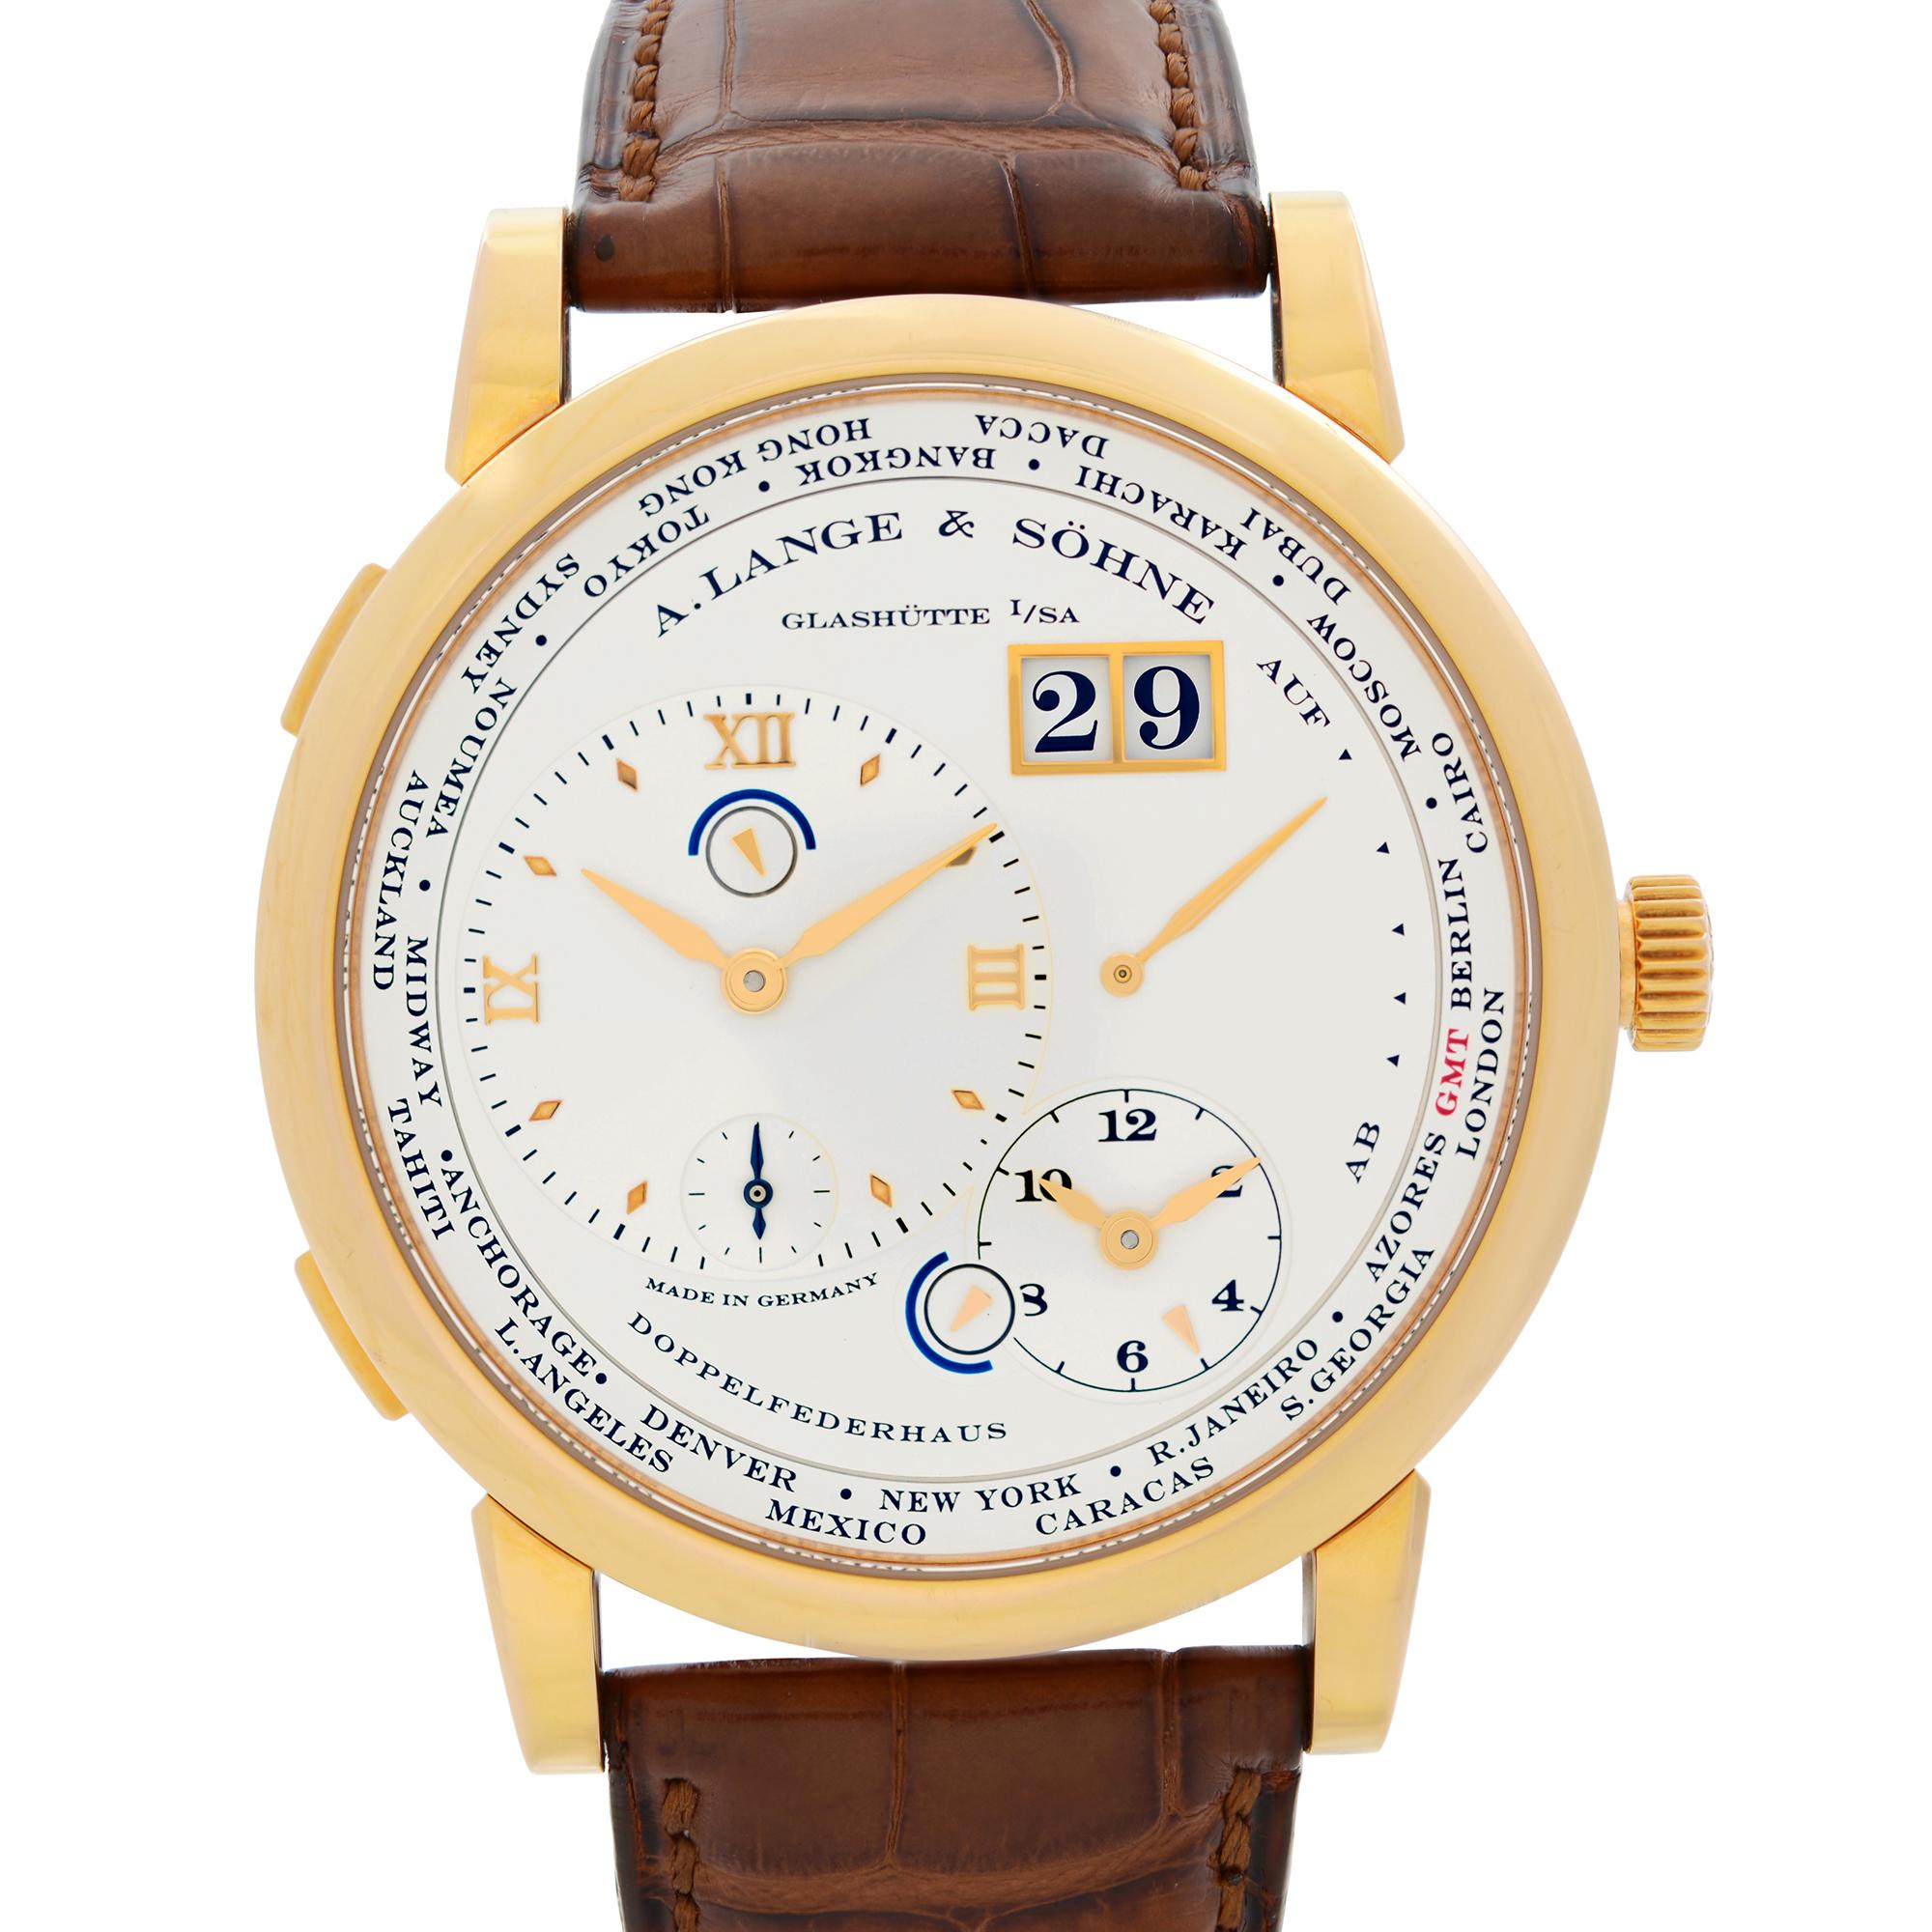 Pre-owned A. Lange & Sohne 1 Timezone 41.9mm 18K Rose Gold Hand Wind Men's Watch 116.032. This Beautiful Timepiece Features: 18k Rose Gold Case with a Brown Crocodile Leather Strap, Fixed 18kt Rose Gold Bezel, Offset Home Time Silver Dial with Rose